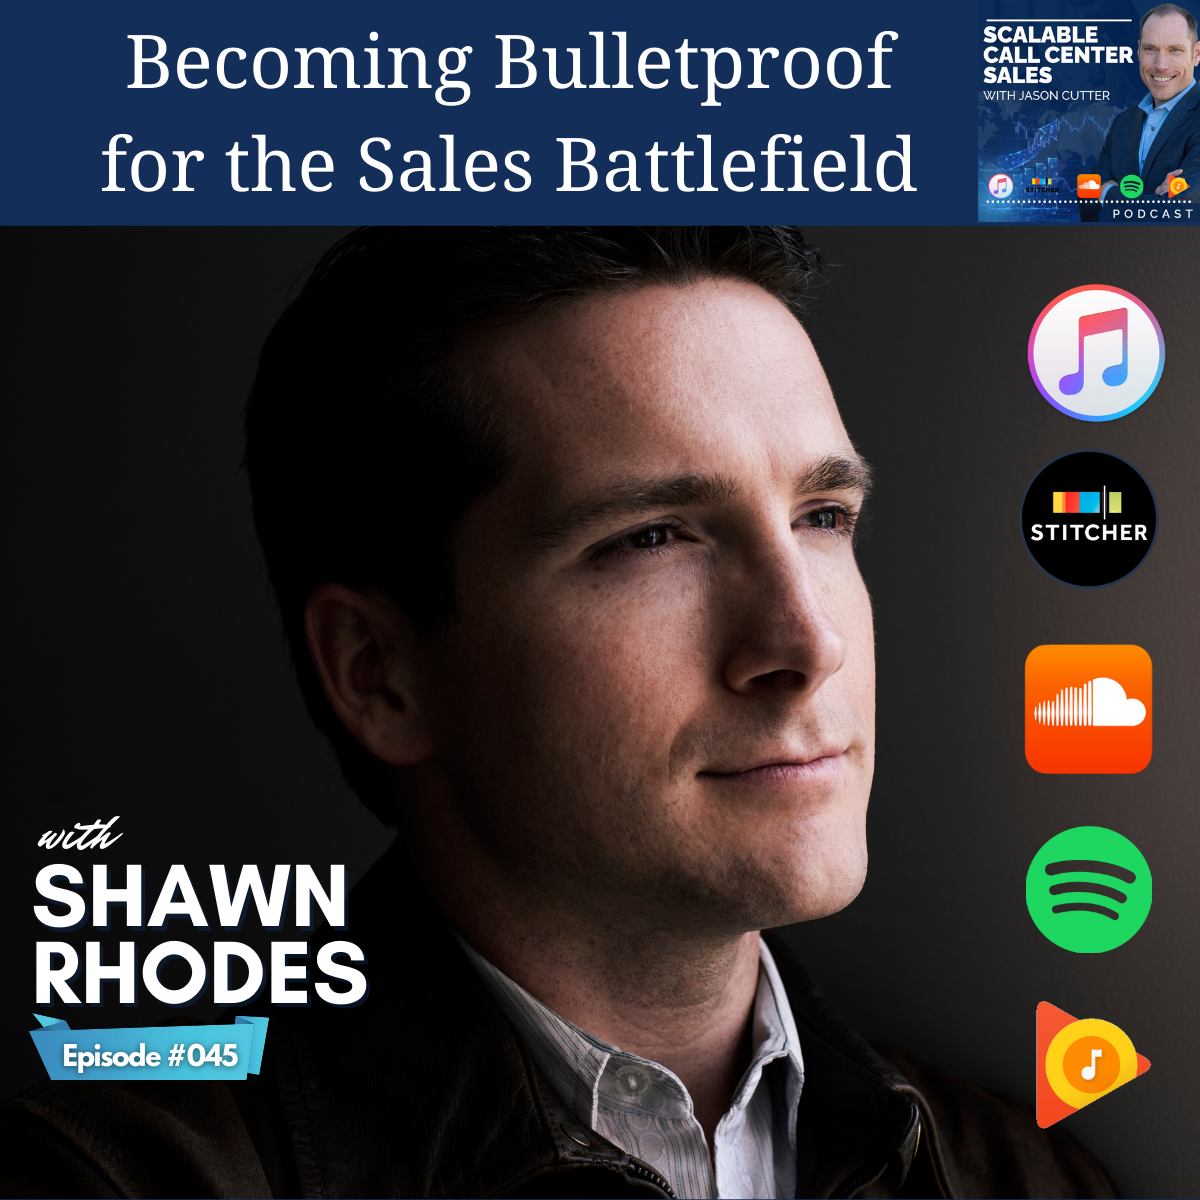 [045] Becoming Bulletproof for the Sales Battlefield, with Shawn Rhodes from Bulletproof Selling